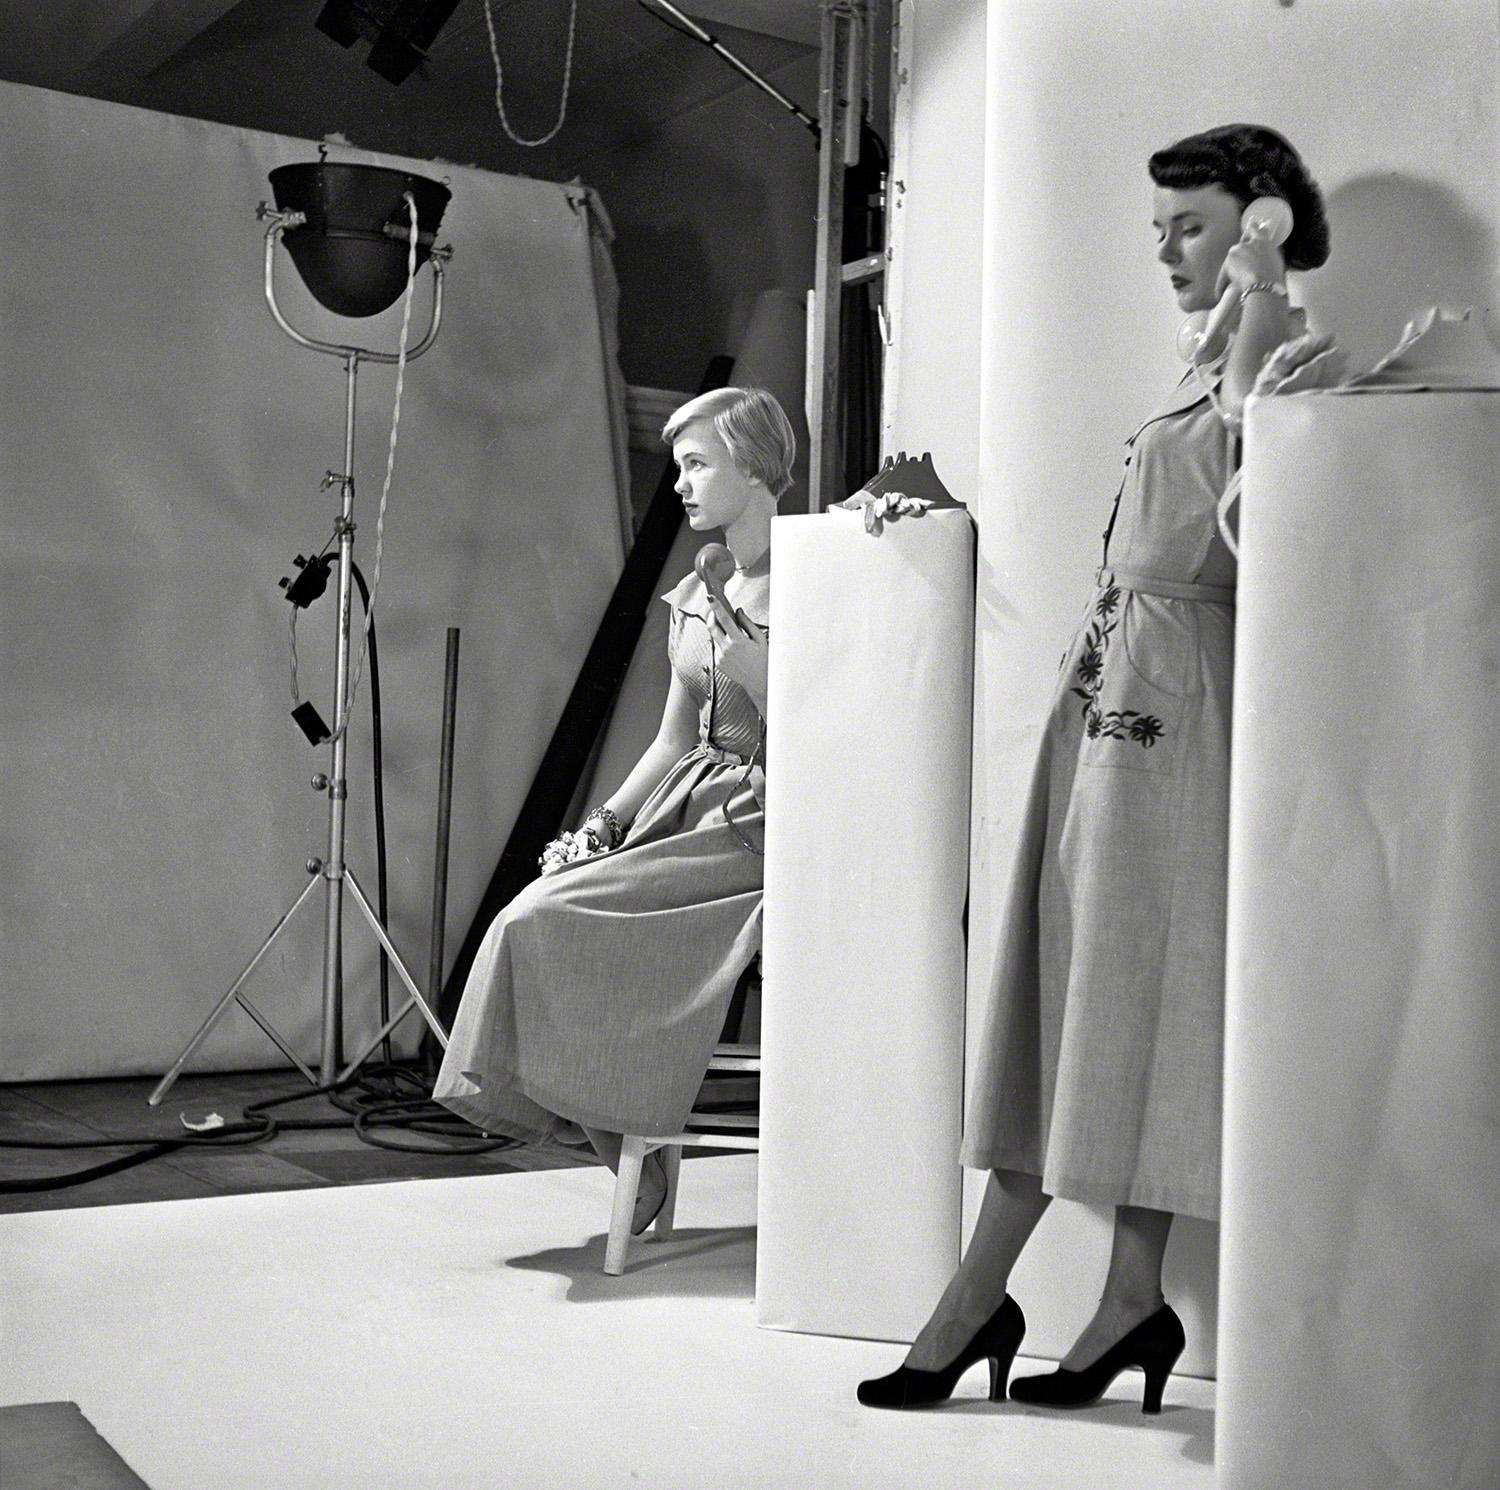 1949. "The mid-century look is now the American look. Photographs show people who personify the 'American look.' Nineteen-year-old fashion model Ann Klem is shown at work and at leisure. Includes Klem (seated) with another woman at a photographer's studio." From photos by Stanley Kubrick and Janet Mevi for the Look magazine assignment "American Look." View full size.